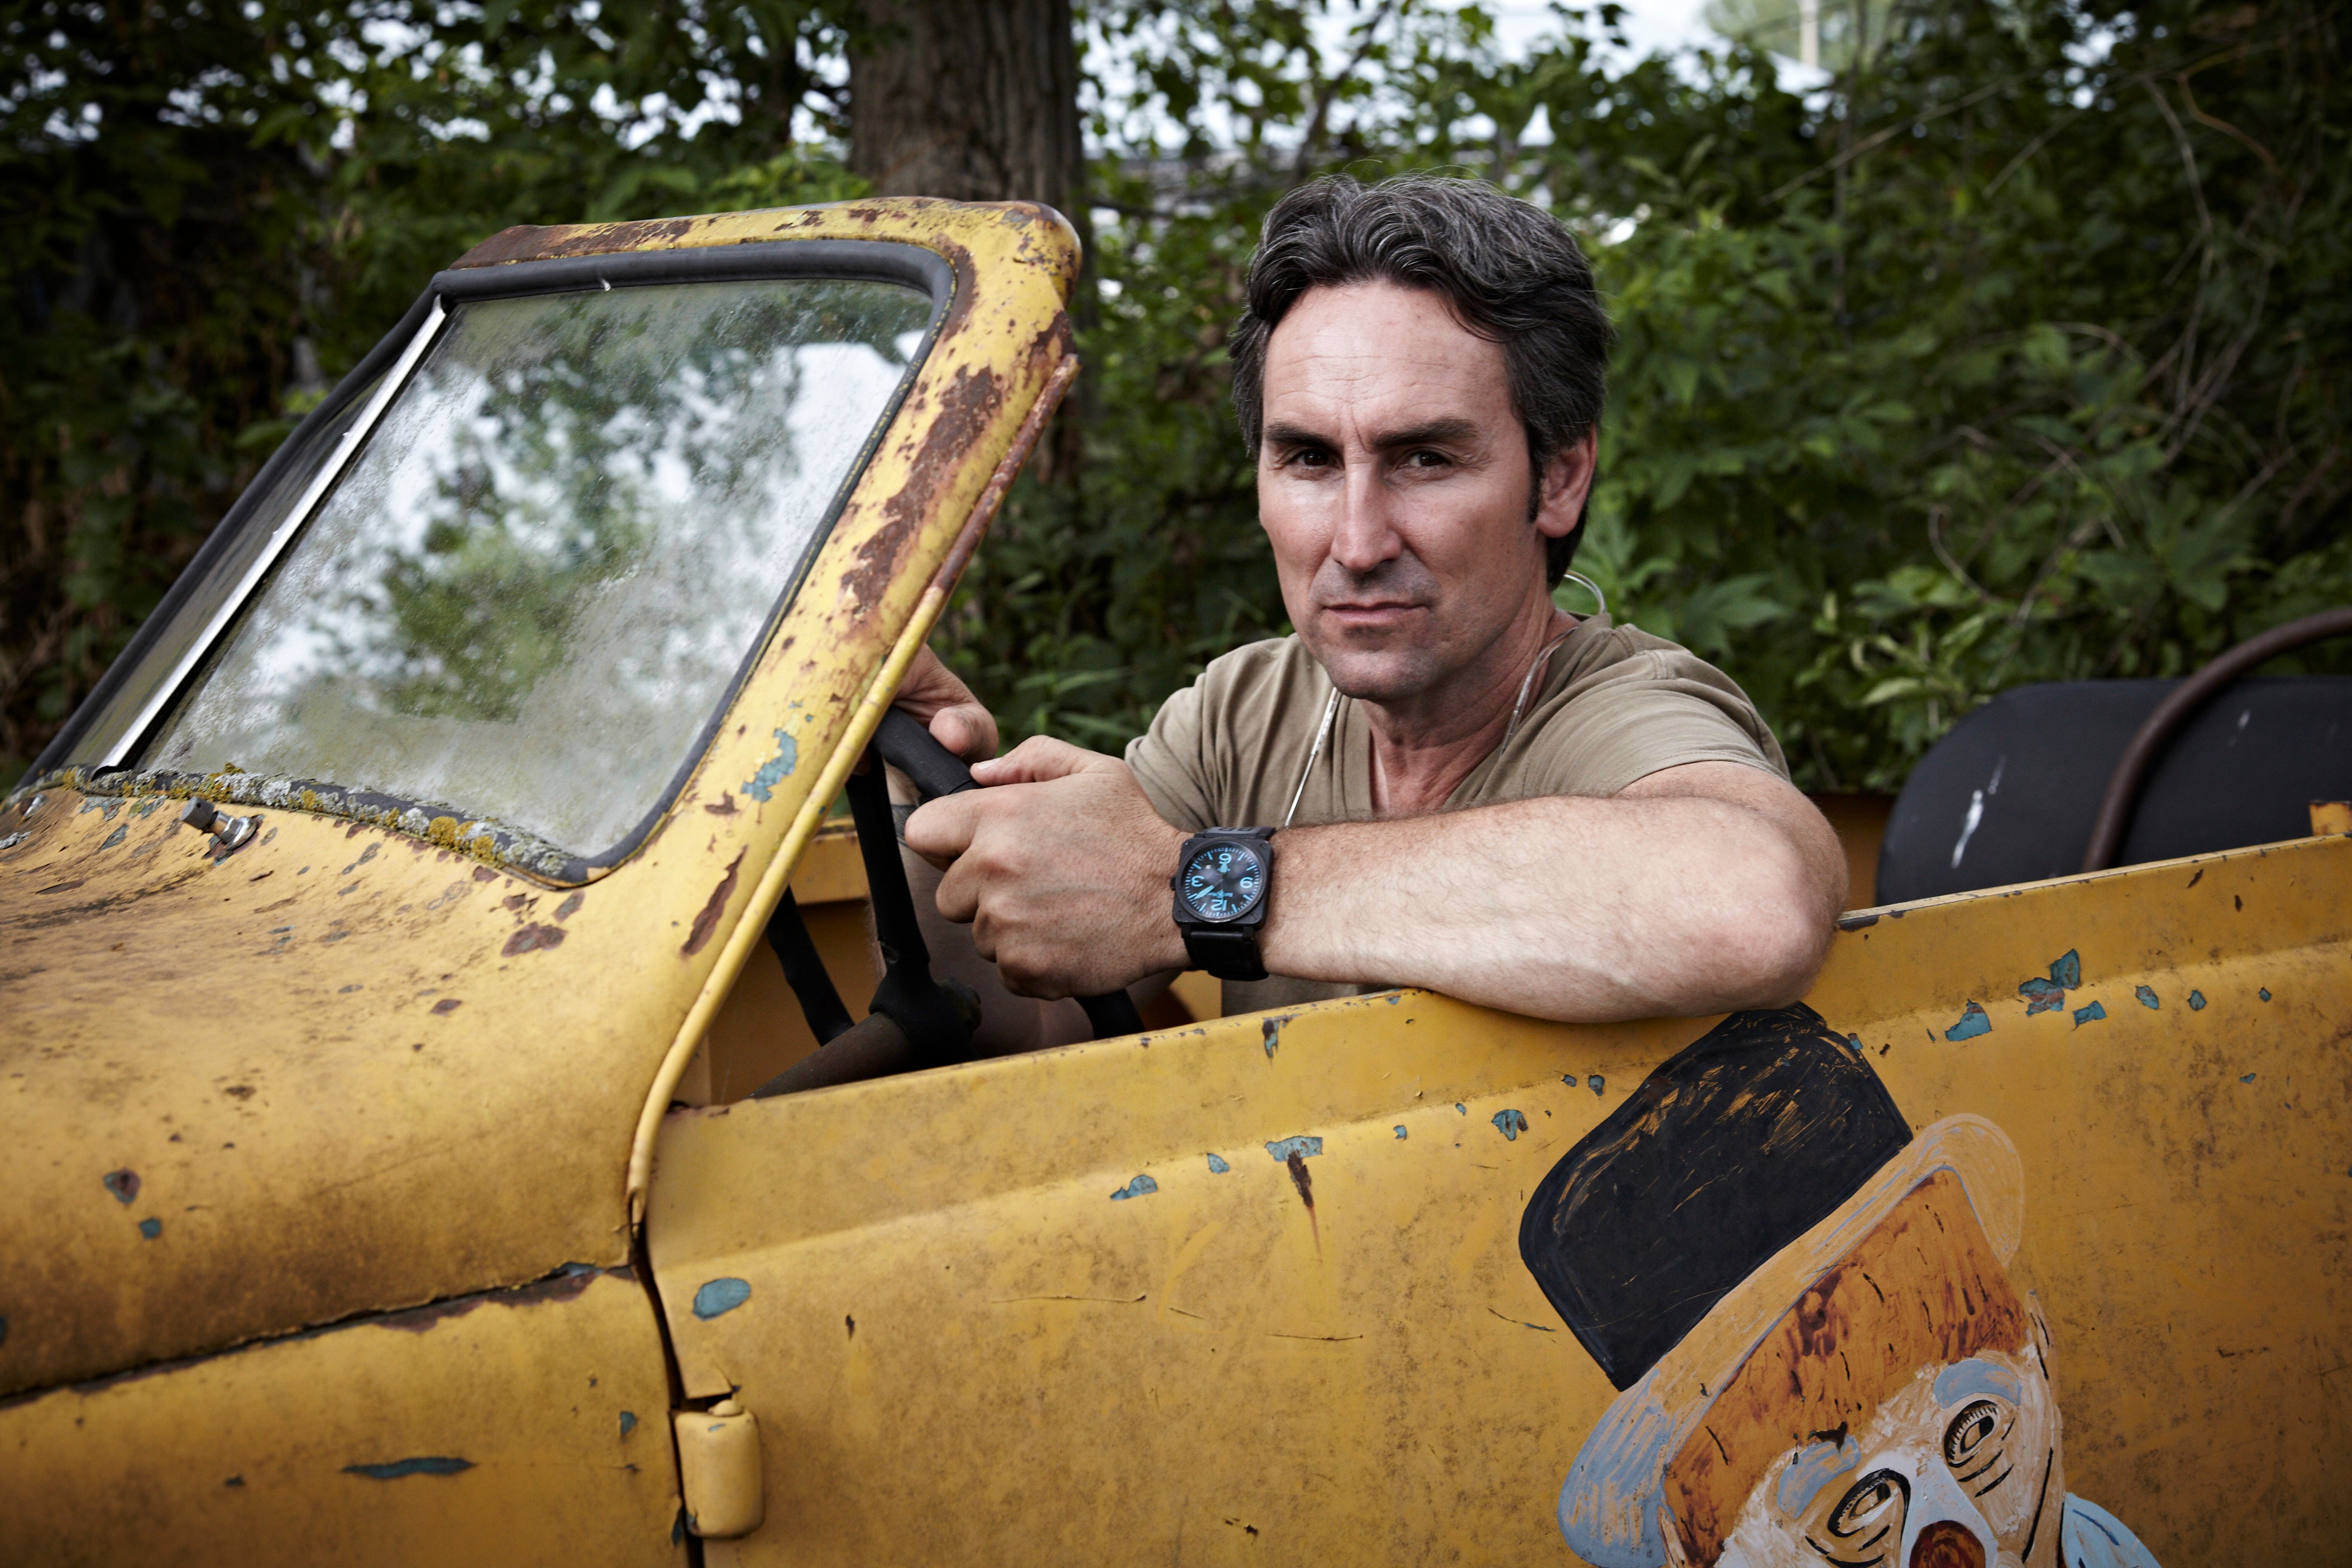 Mike Wolfe of 'American Pickers' behind the wheel of an old car